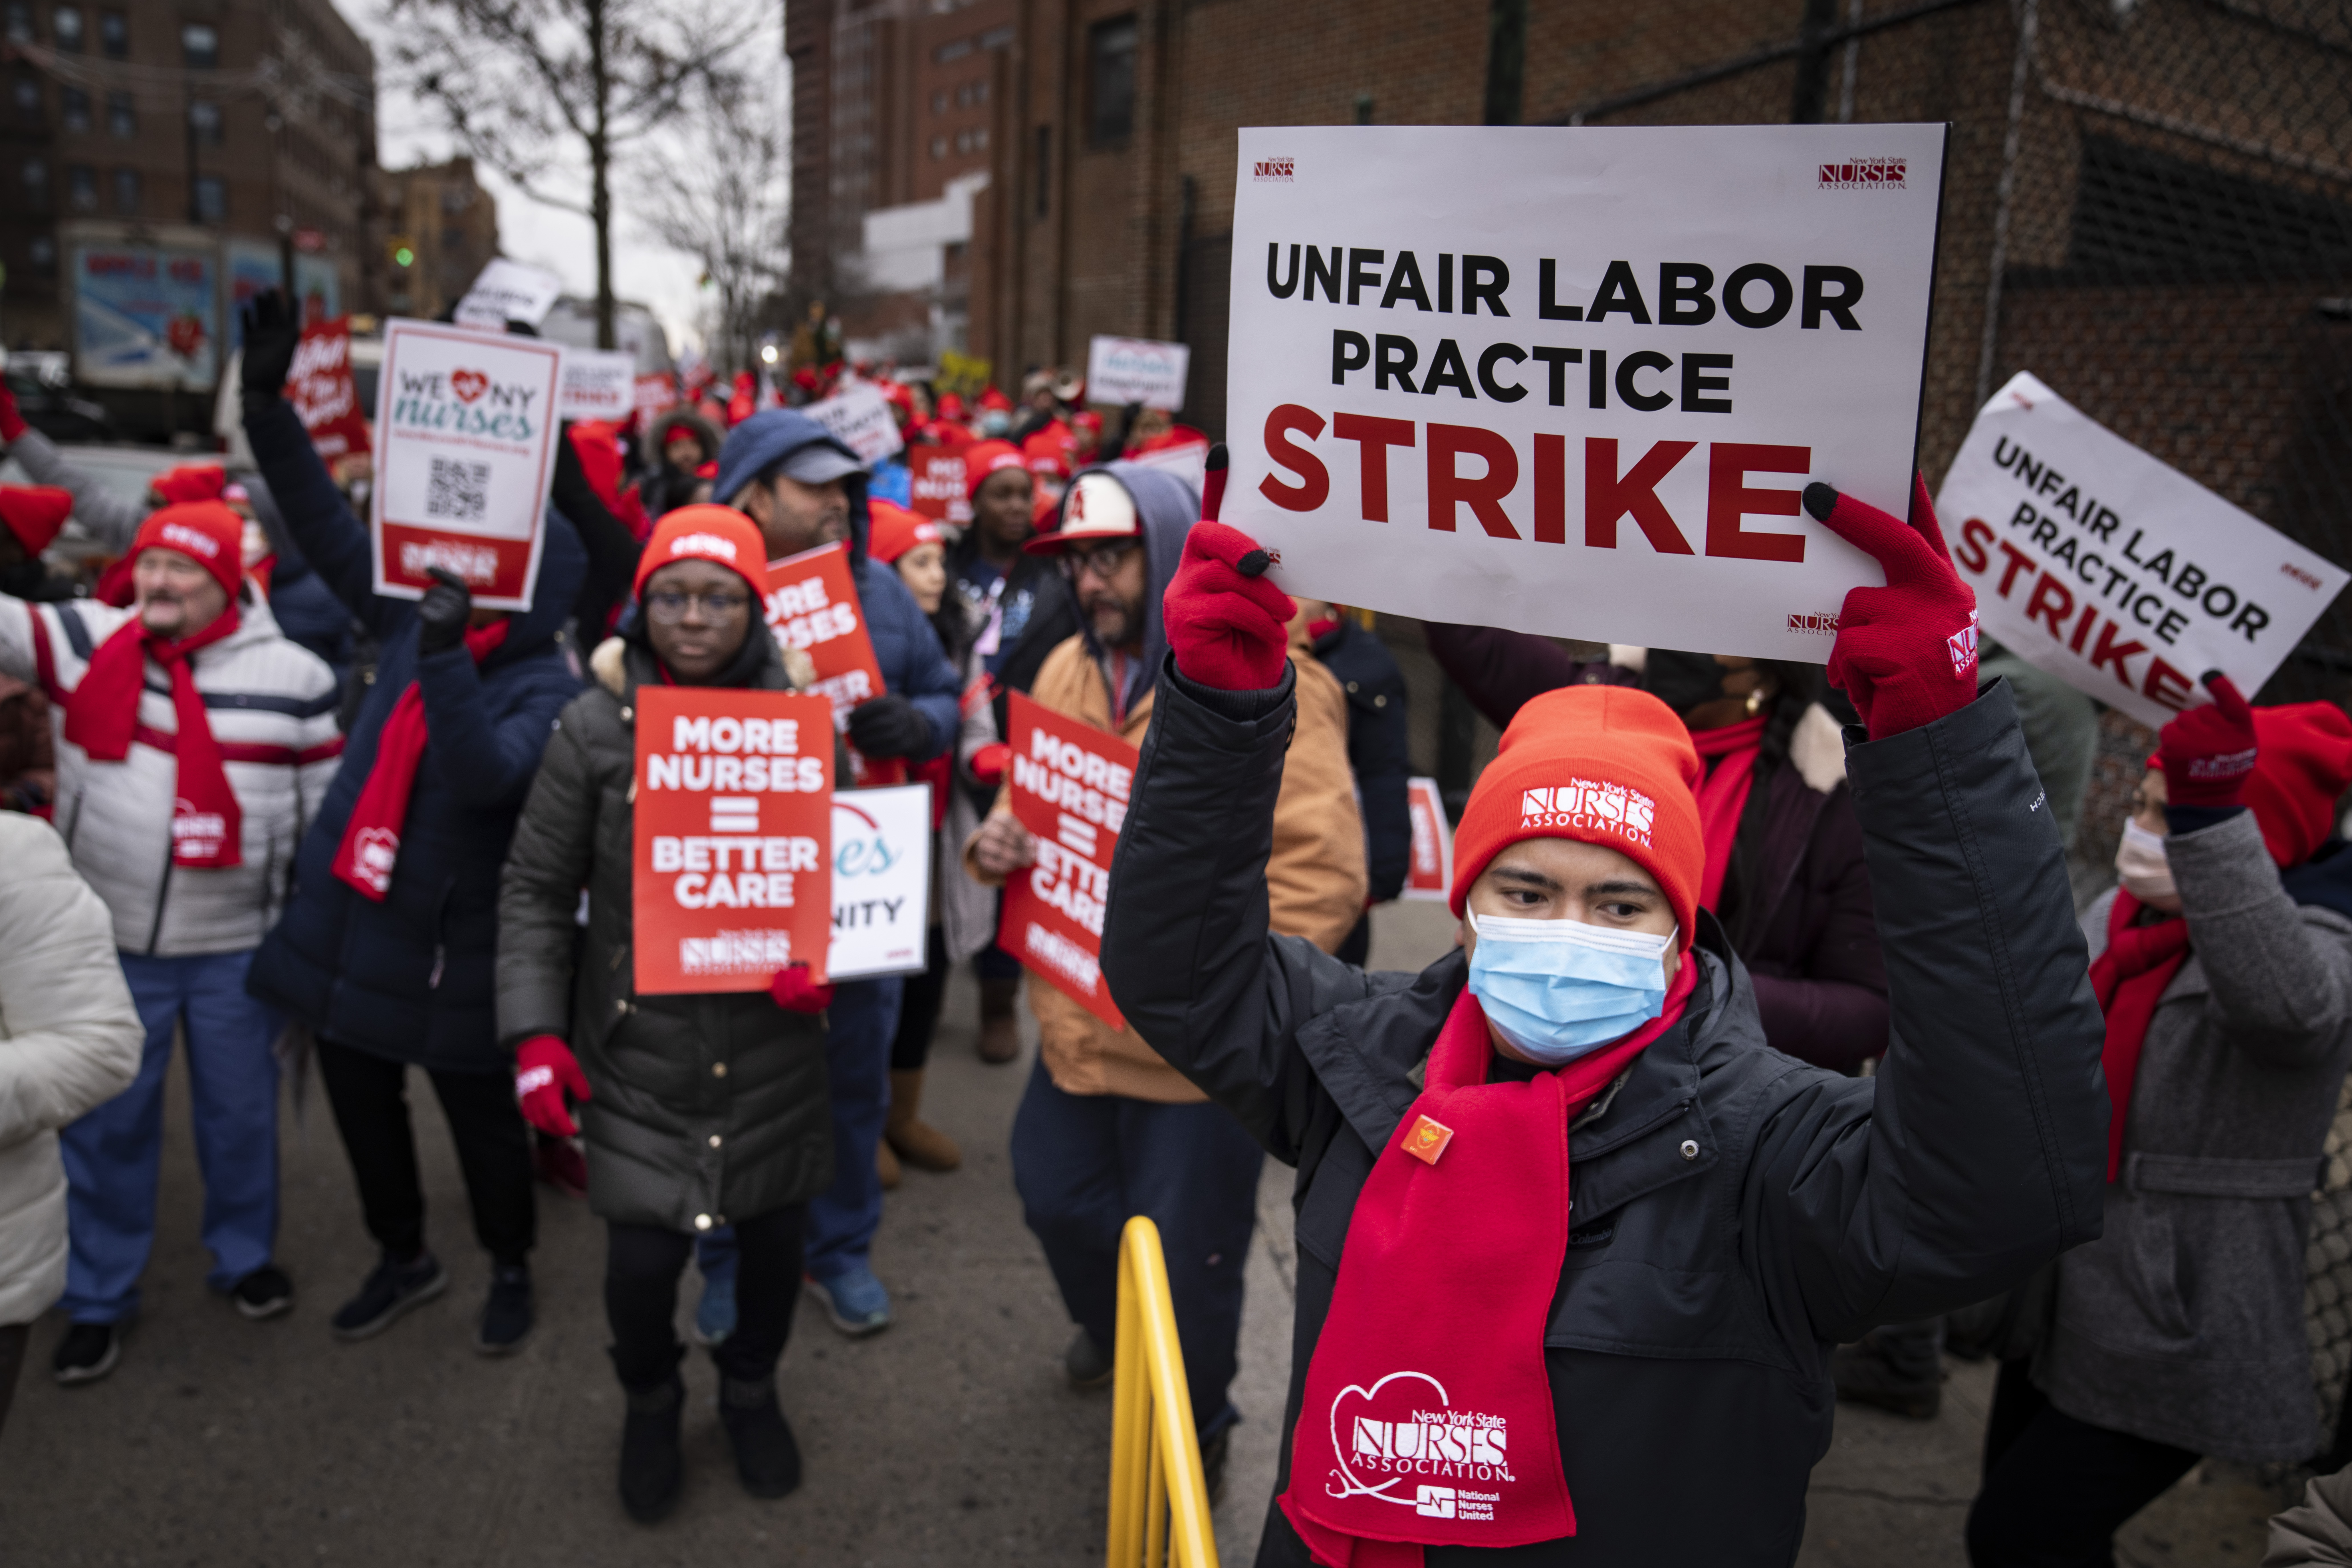 Protesters march in the street around Montefiore Medical Center during a nursing strike, Wednesday, Jan. 11, 2023, in the Bronx borough of New York (AP Photo/John Minchillo)